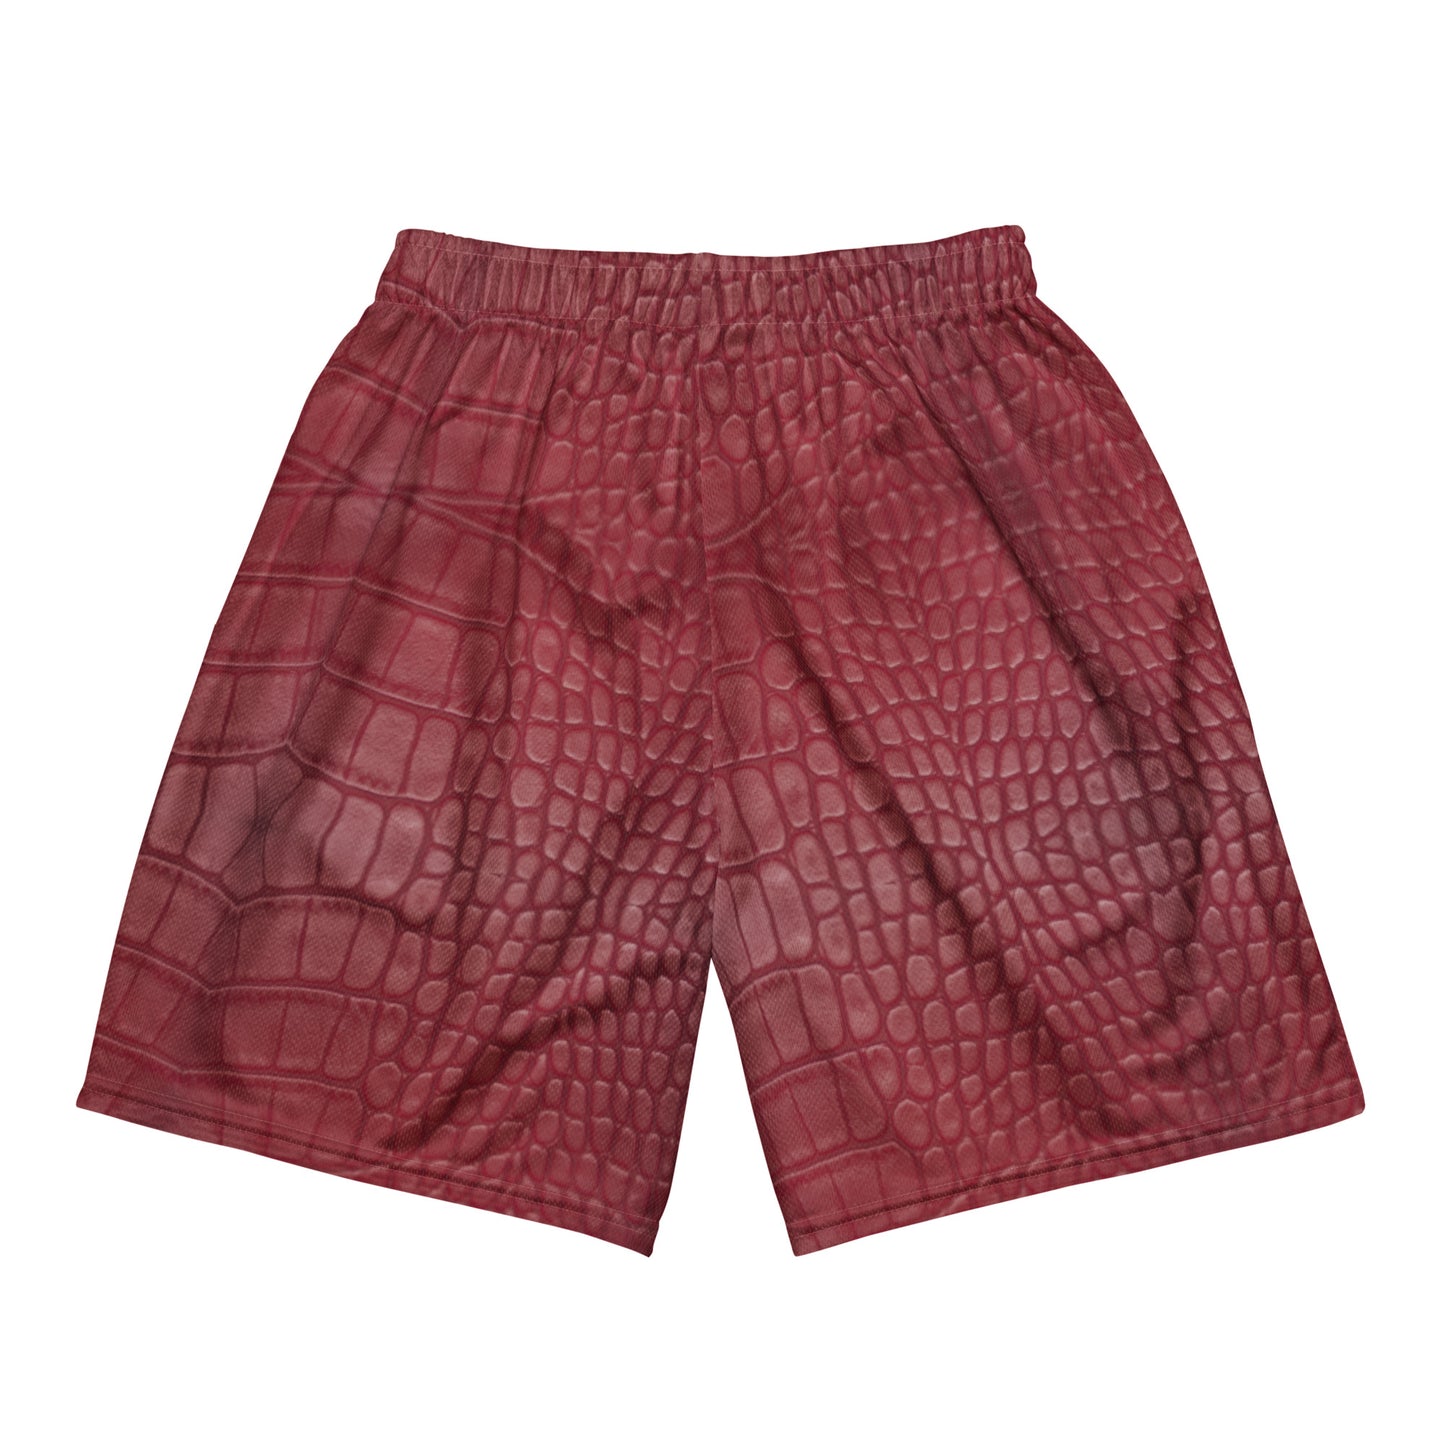 VOYOU RED SKIN Recycled Gym Shorts